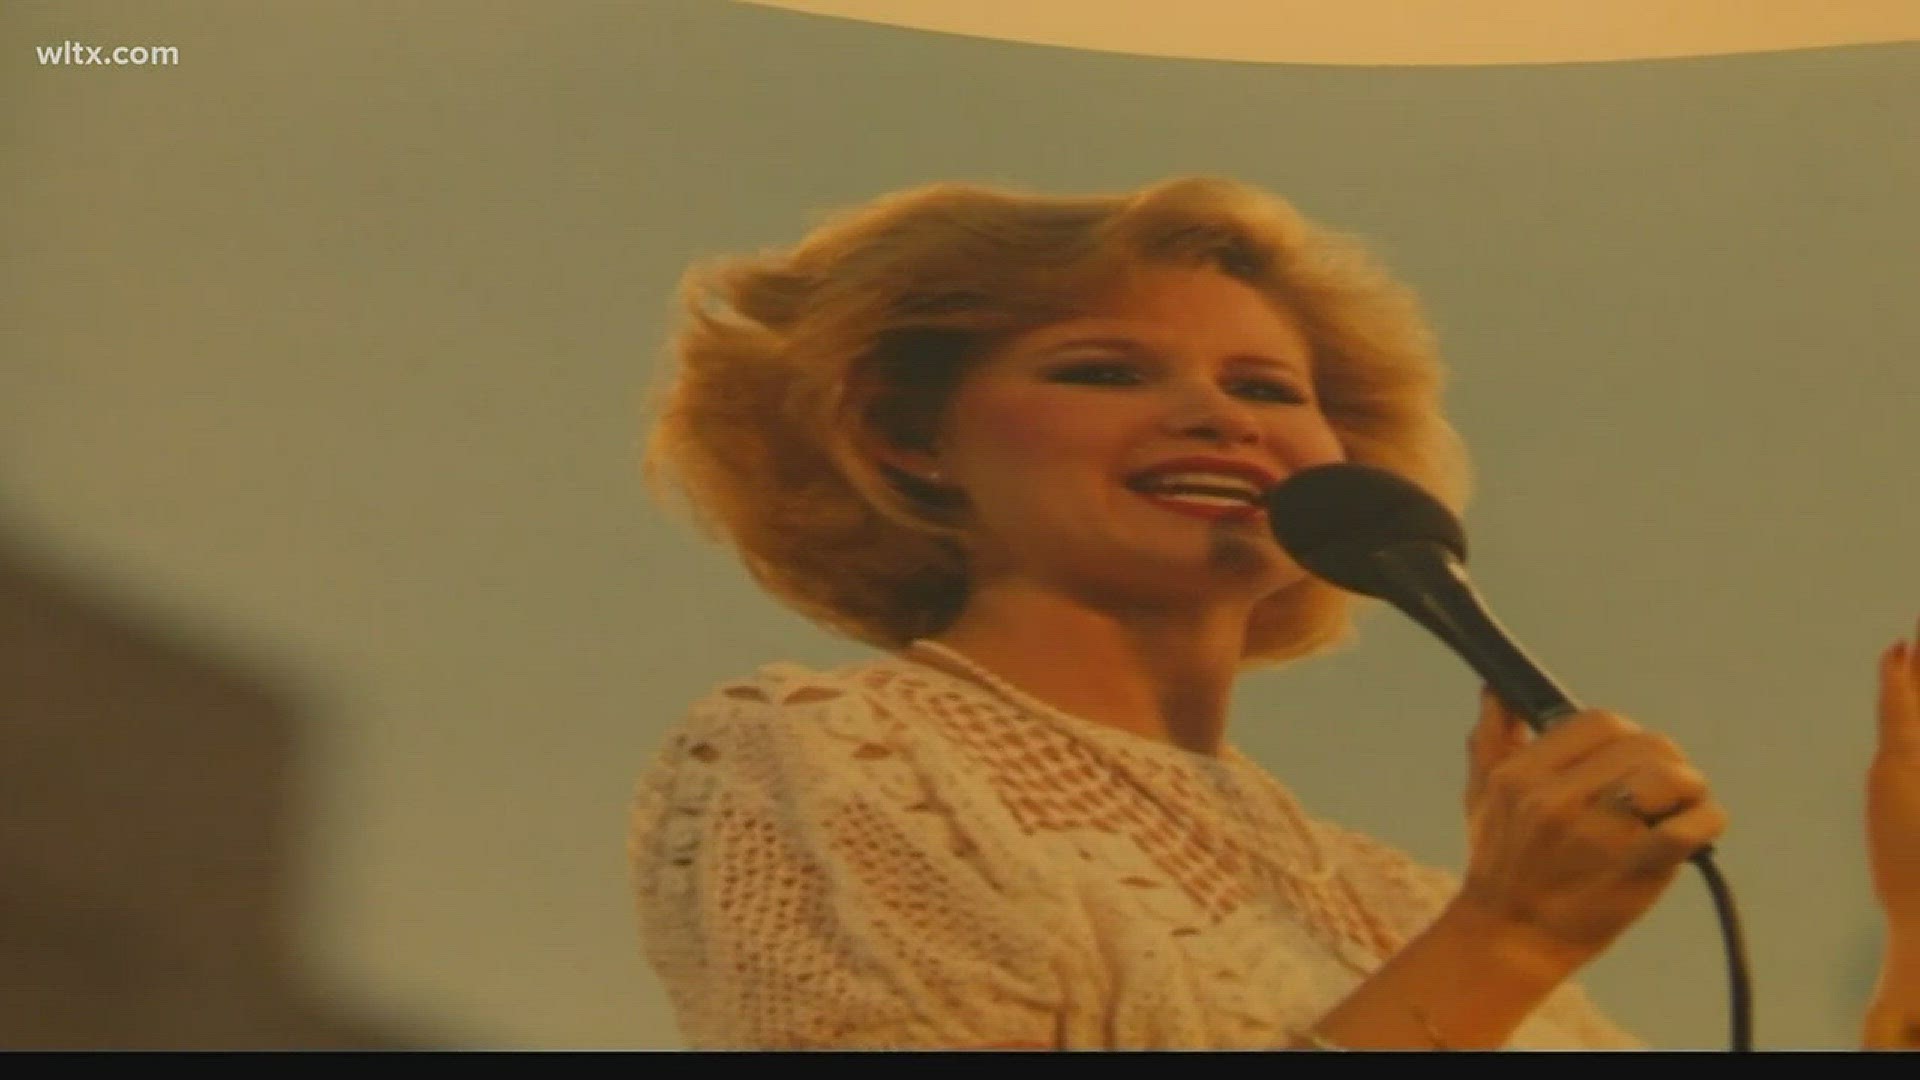 Dawn Smith Jordan didn't just meet Billy Graham but the former Miss South carolina was invited to sing and speak on stage when his crusade came to williams Brice in 1987.